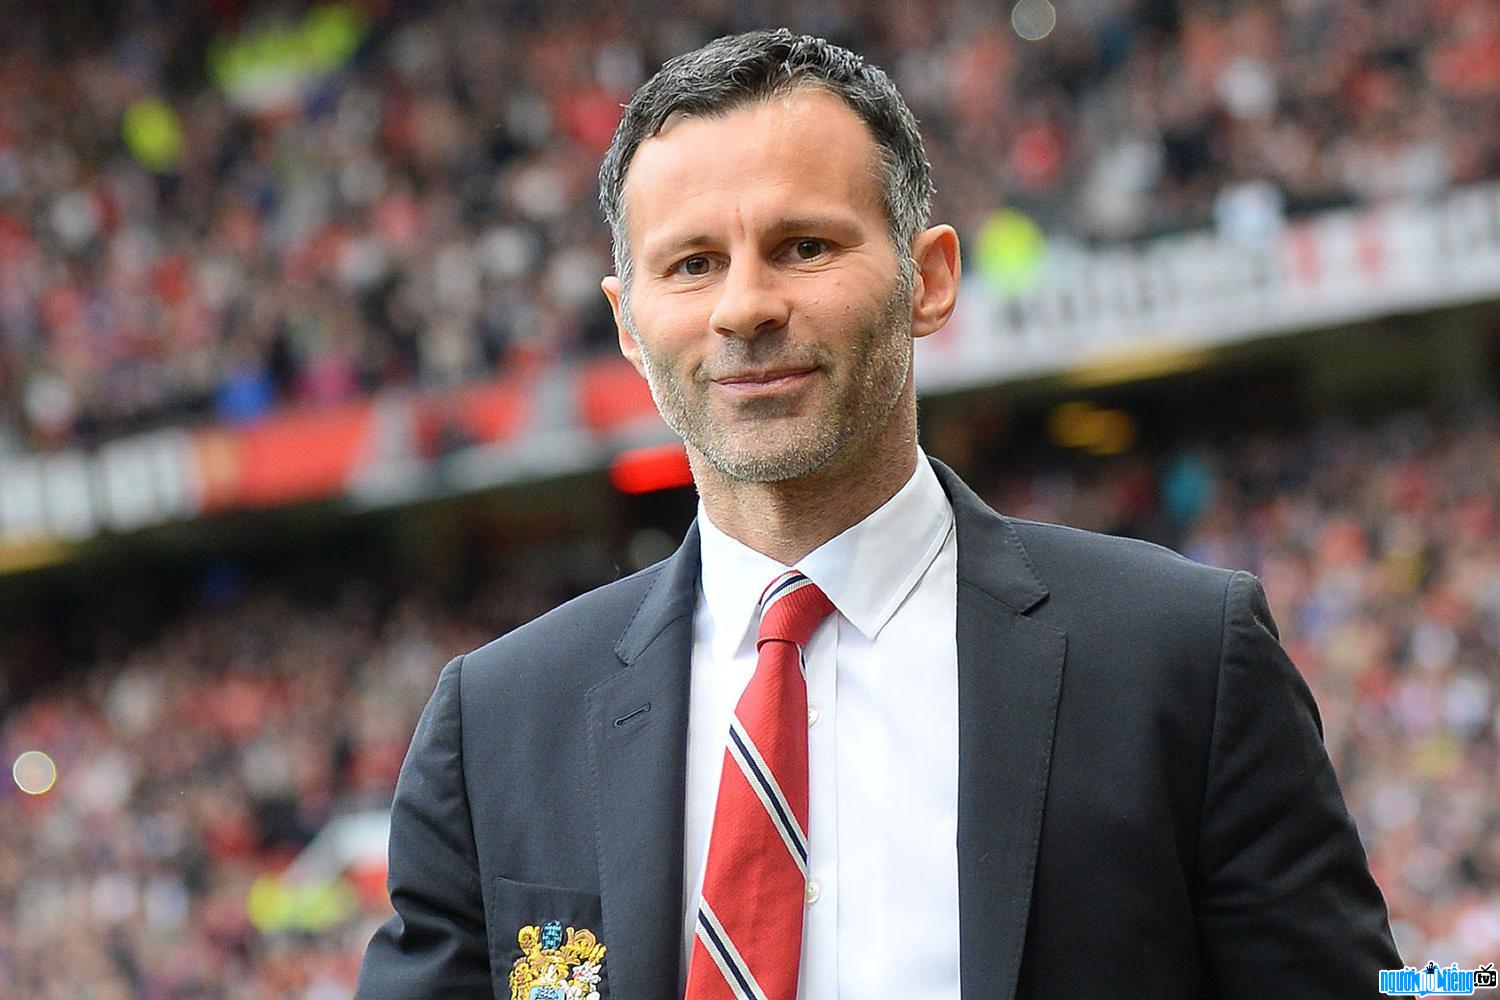 Latest Picture of Ryan Giggs Footballer